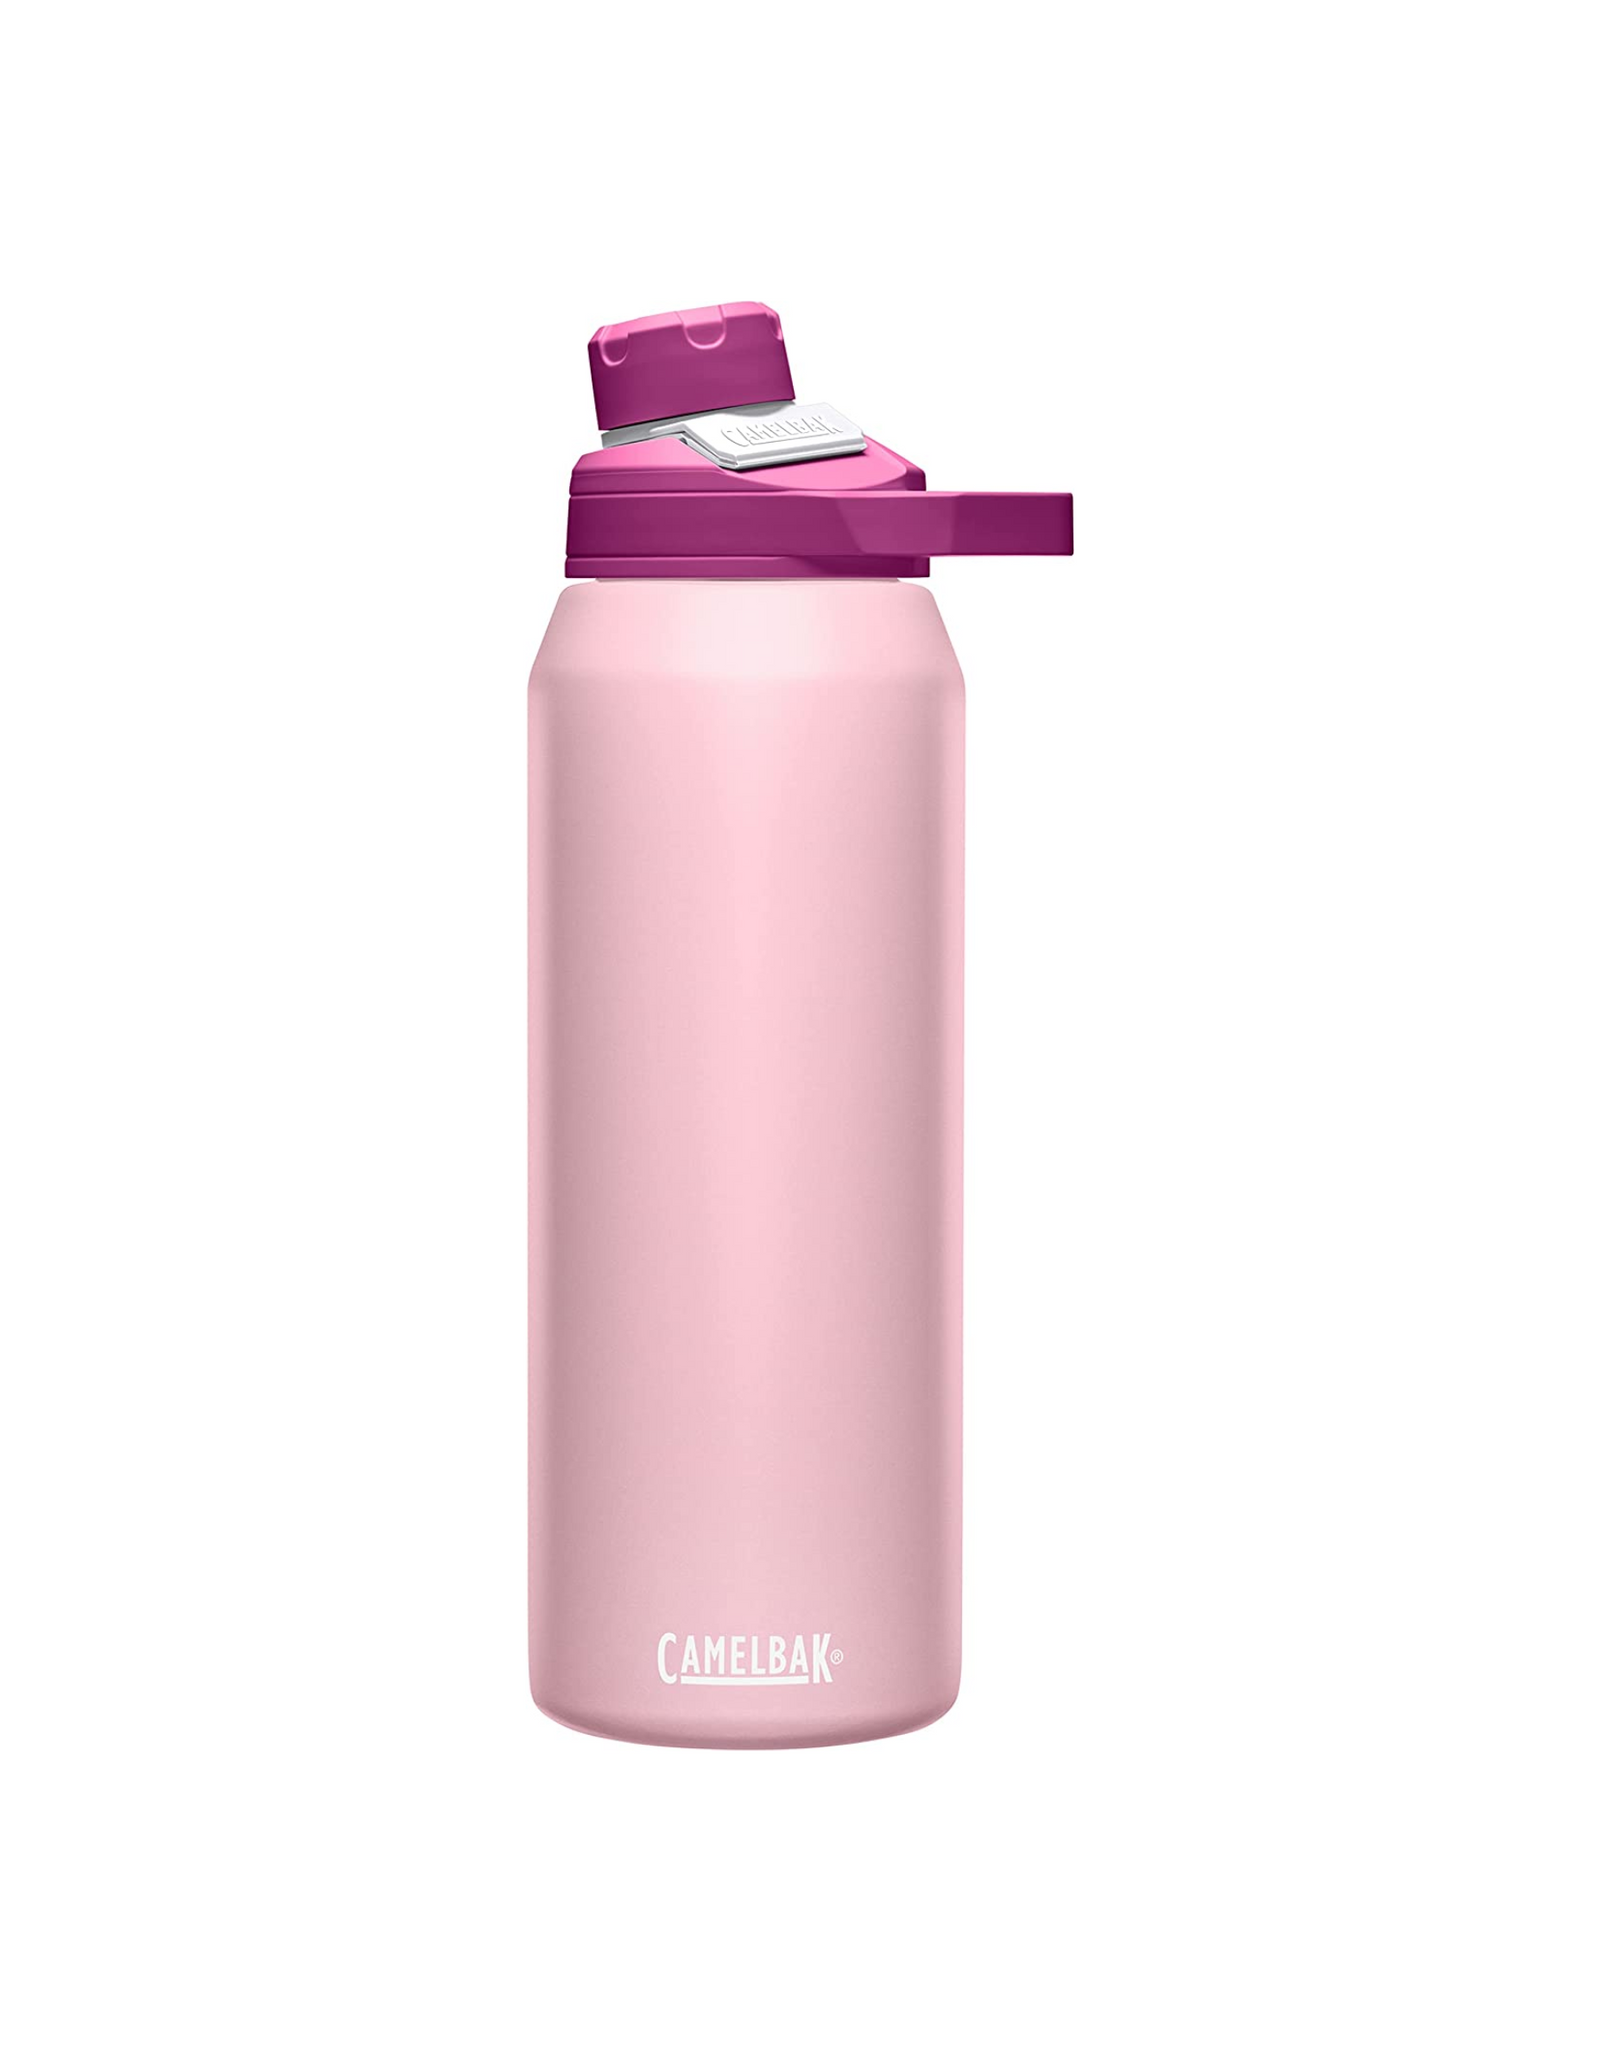 CamelBak Chute Mag Water Bottle, Insulated Stainless Steel, 32 oz, Adventure Pink